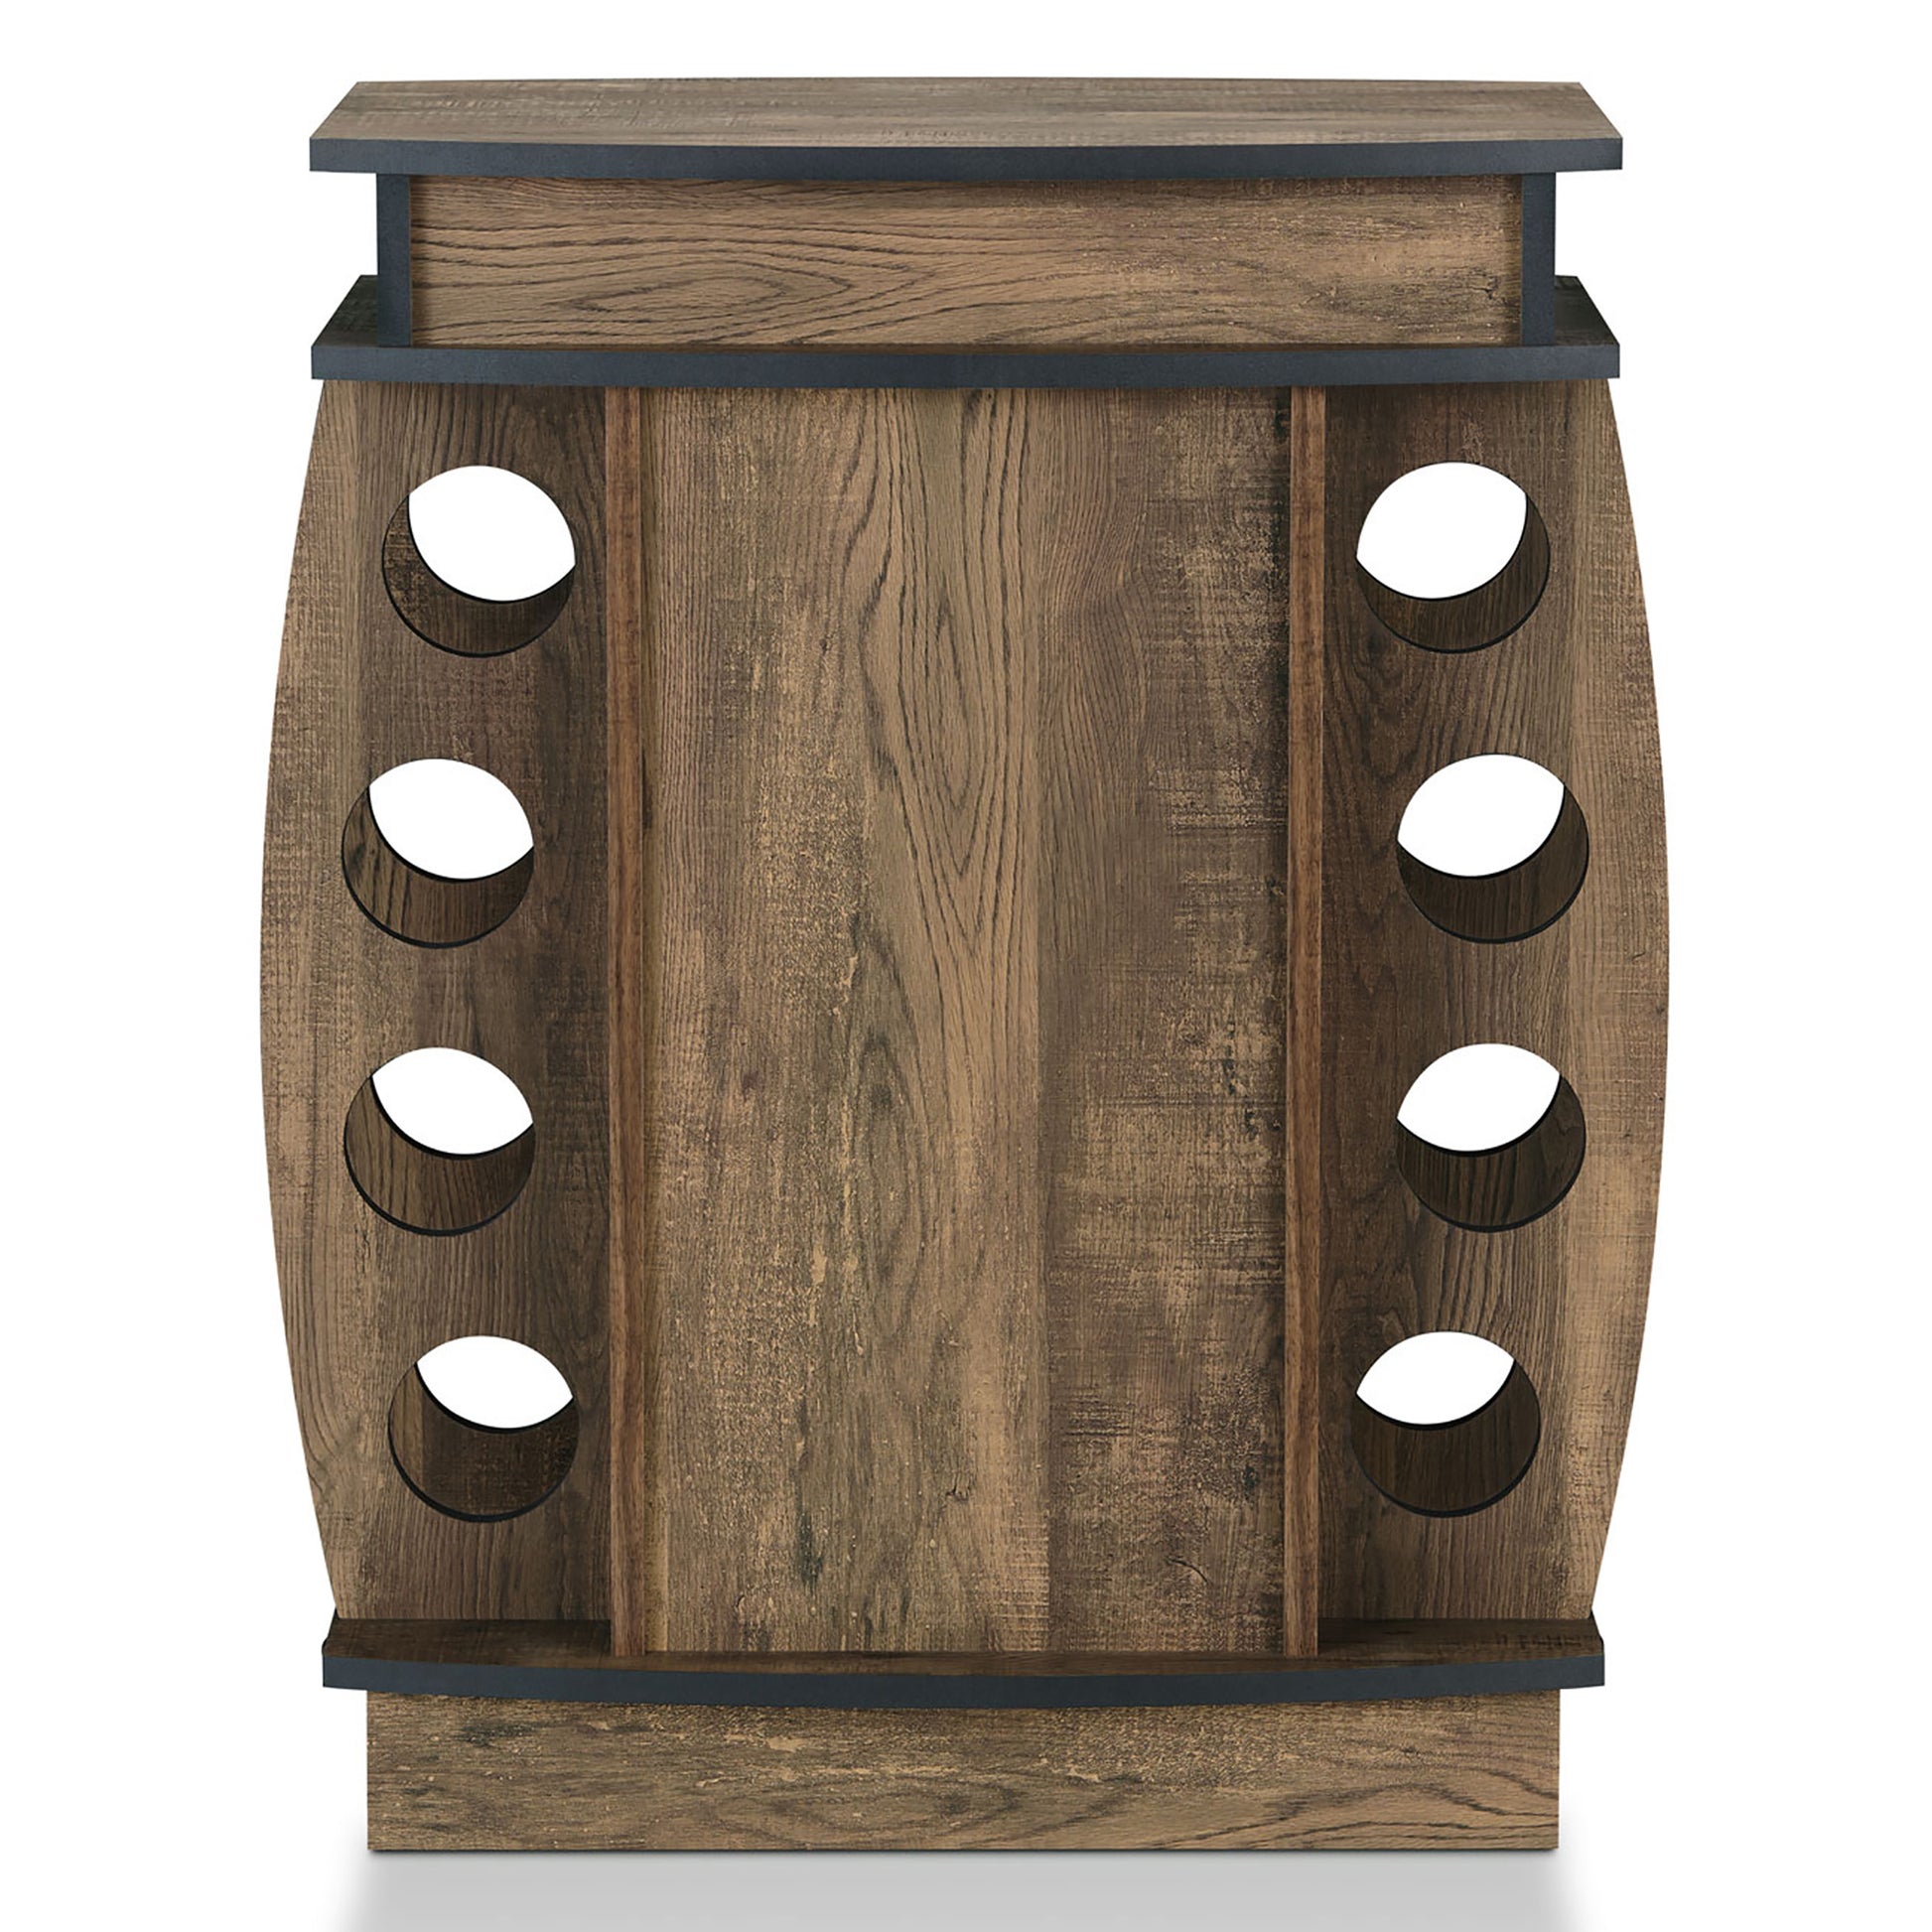 Front-facing rustic reclaimed oak bar cabinet with an eight-bottle wine rack on a white background